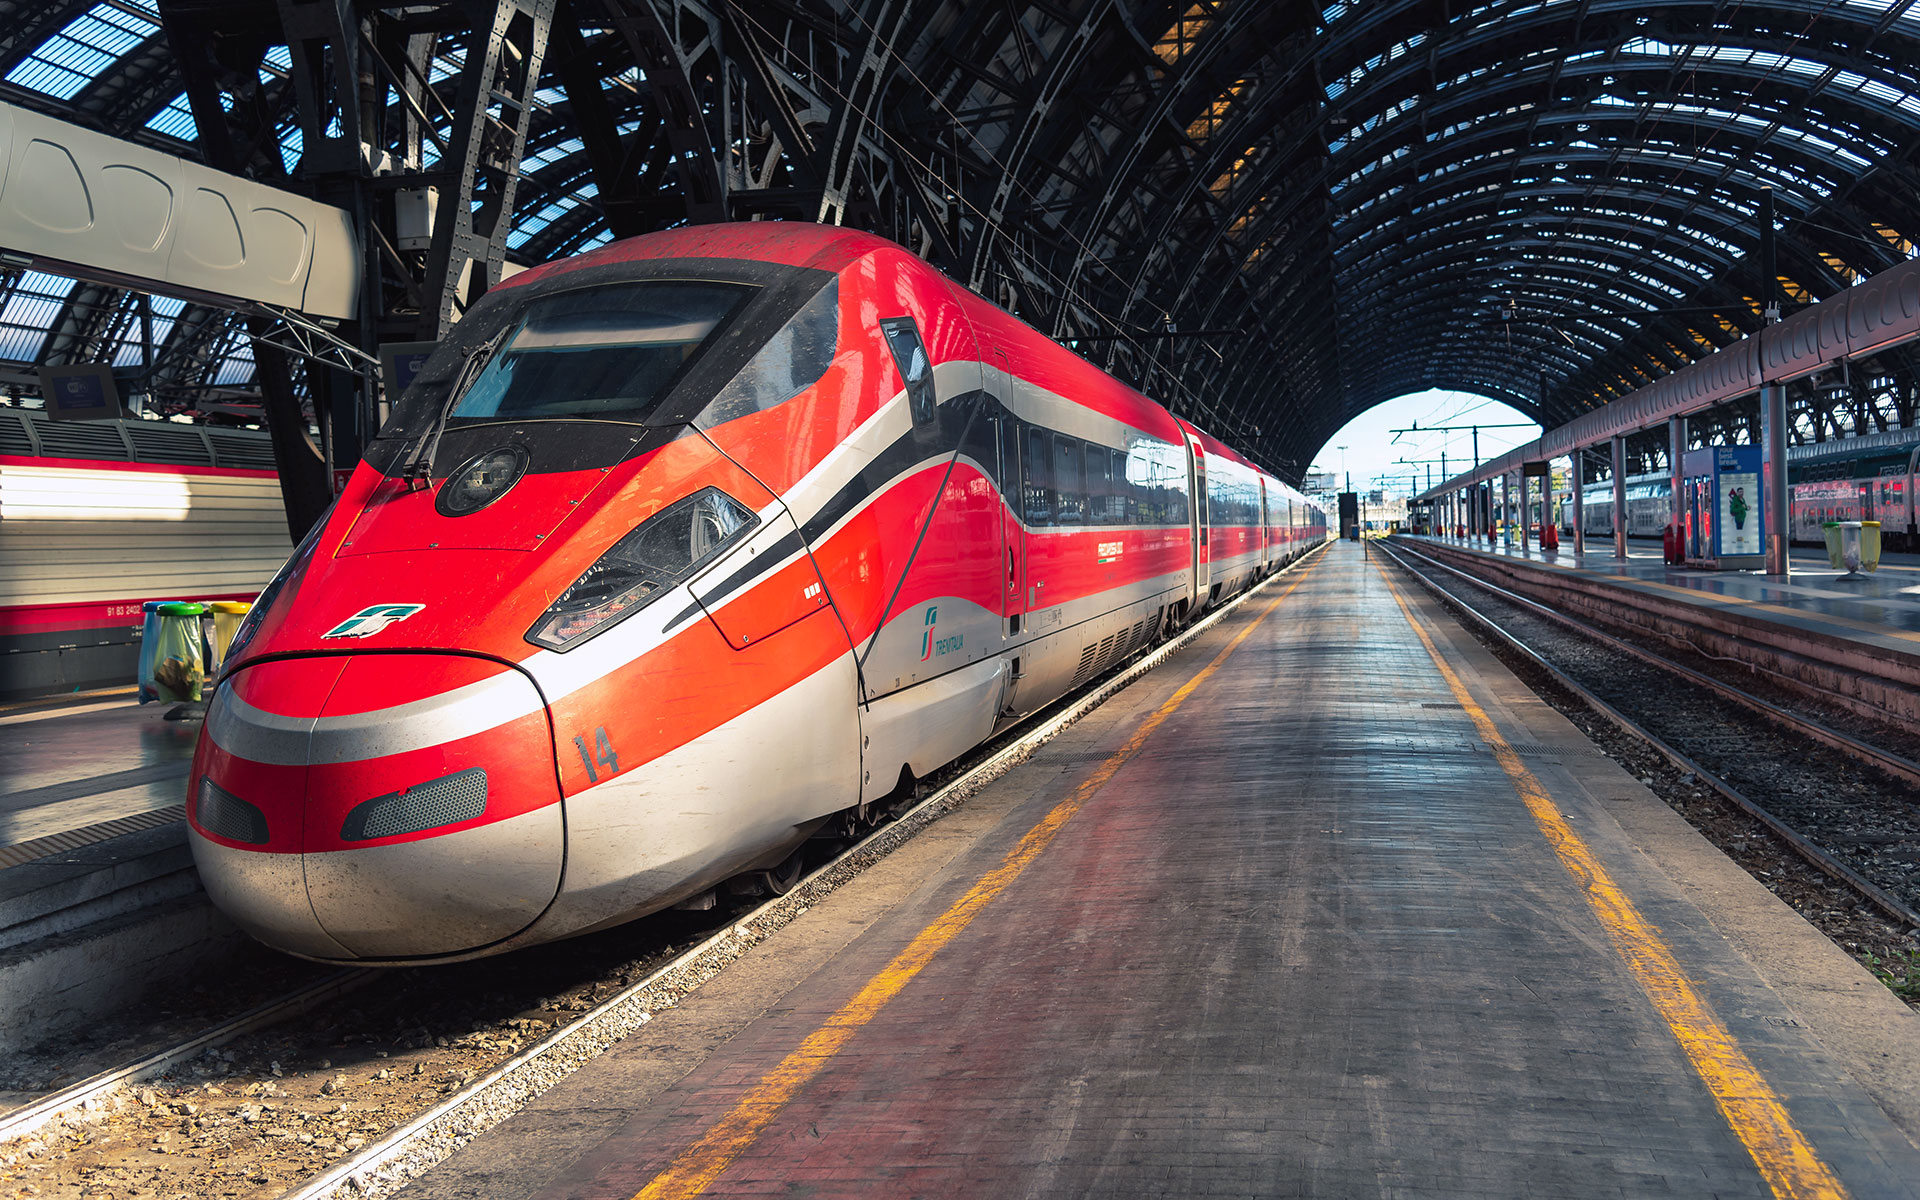 Trenitalia is increasingly using its sleek Frecciarossa trains to destinations well removed from the high-speed network (photo © Petru Stan / dreamstime.com).